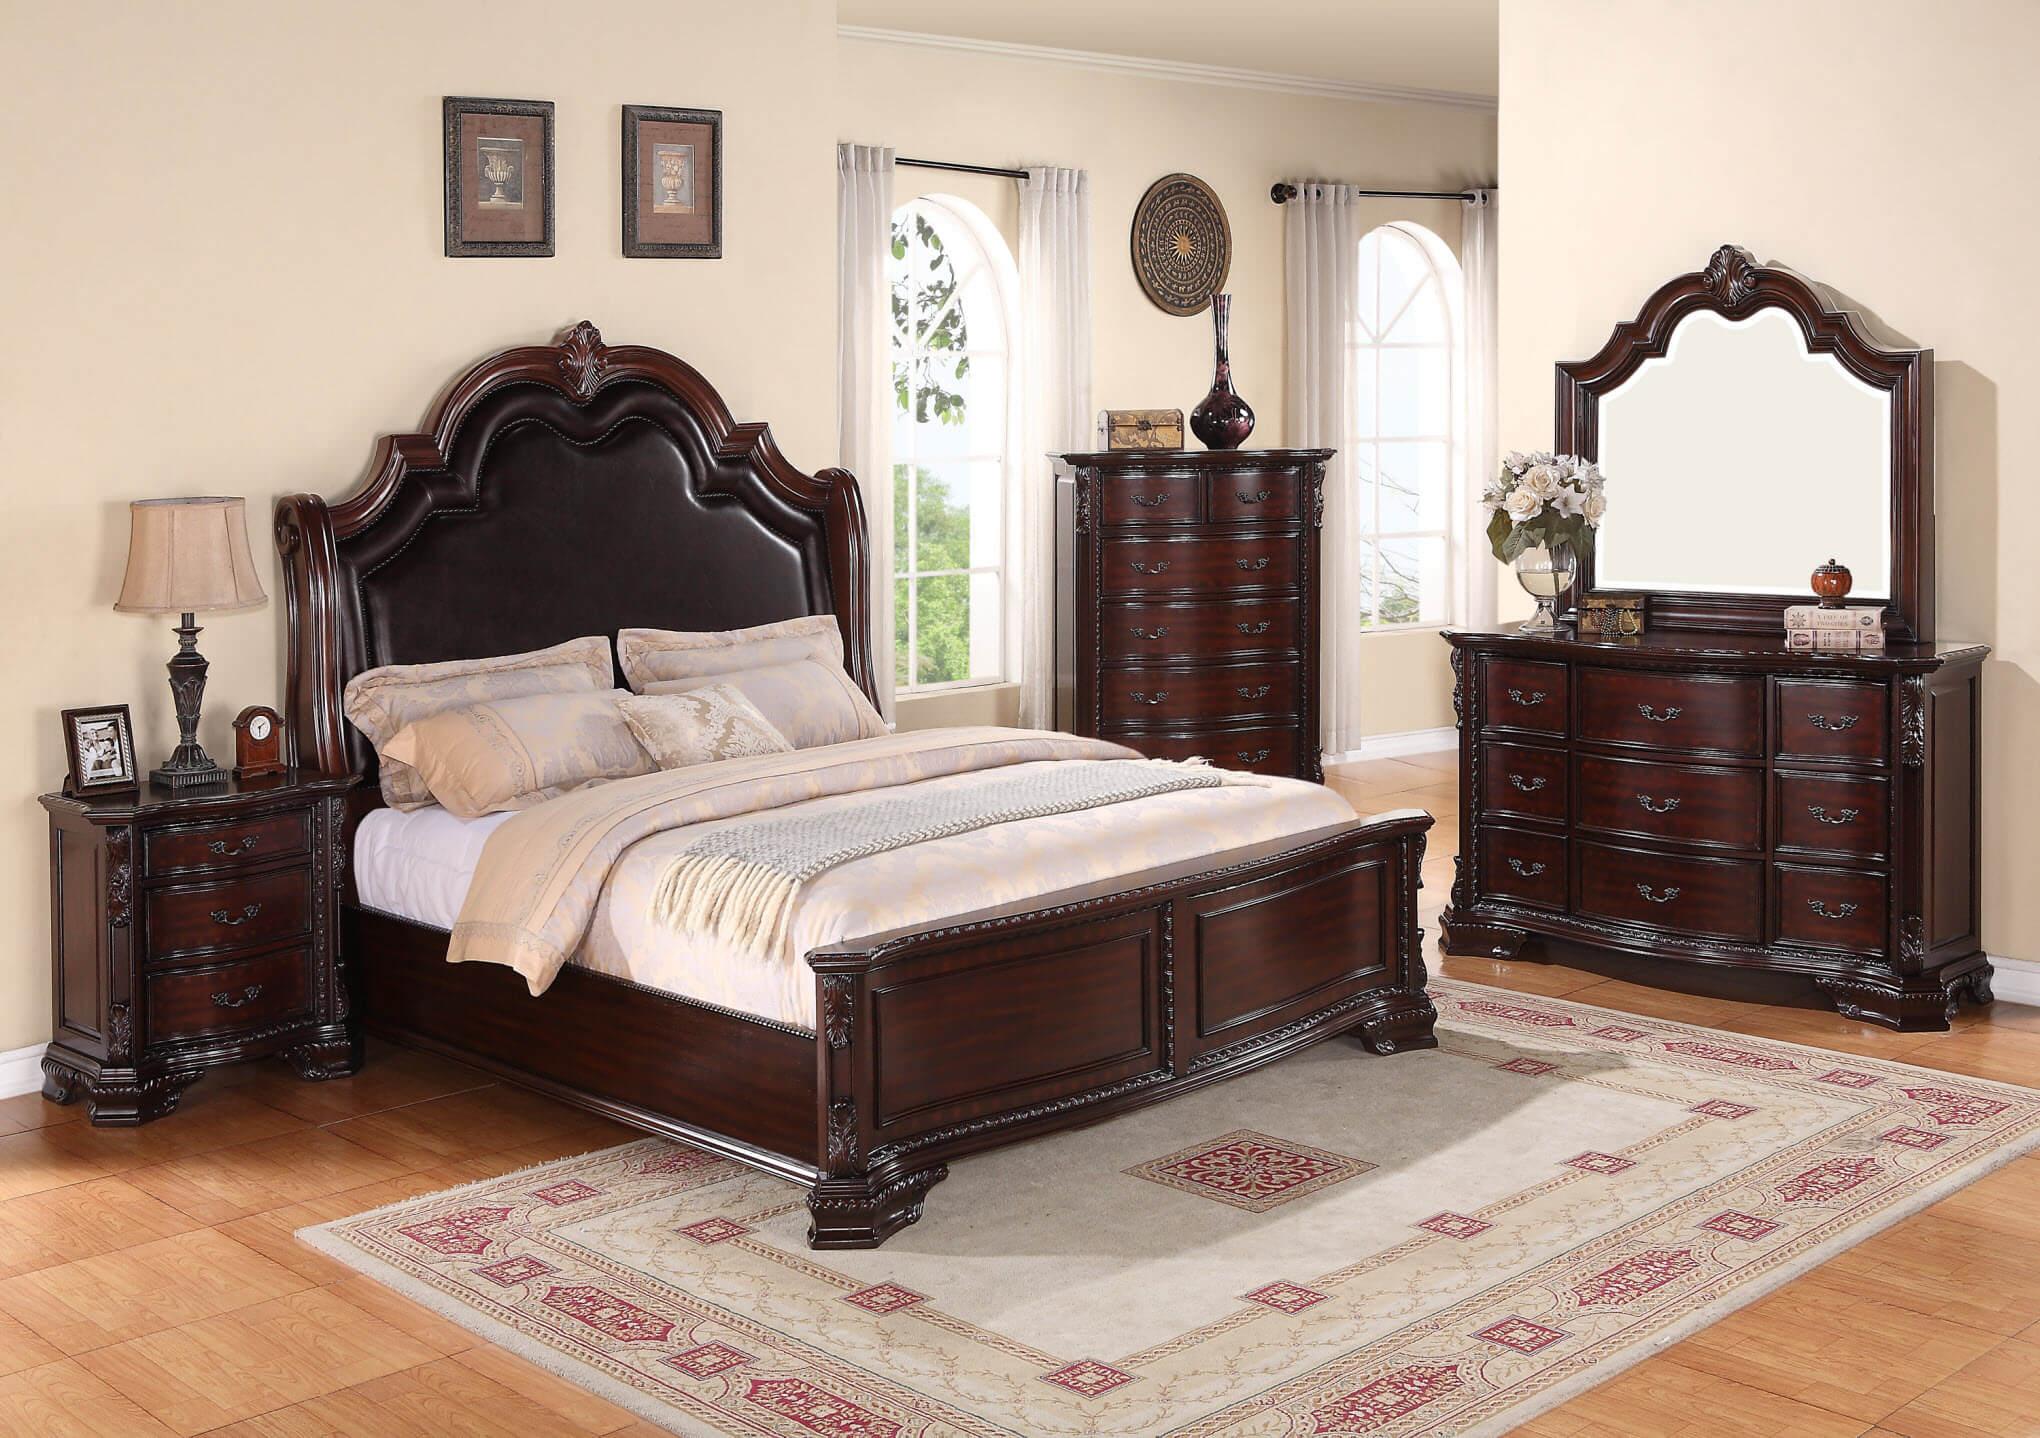 Classic, Vintage Panel Bedroom Set Sheffield B1100-Q-Bed-5pcs in Brown PU